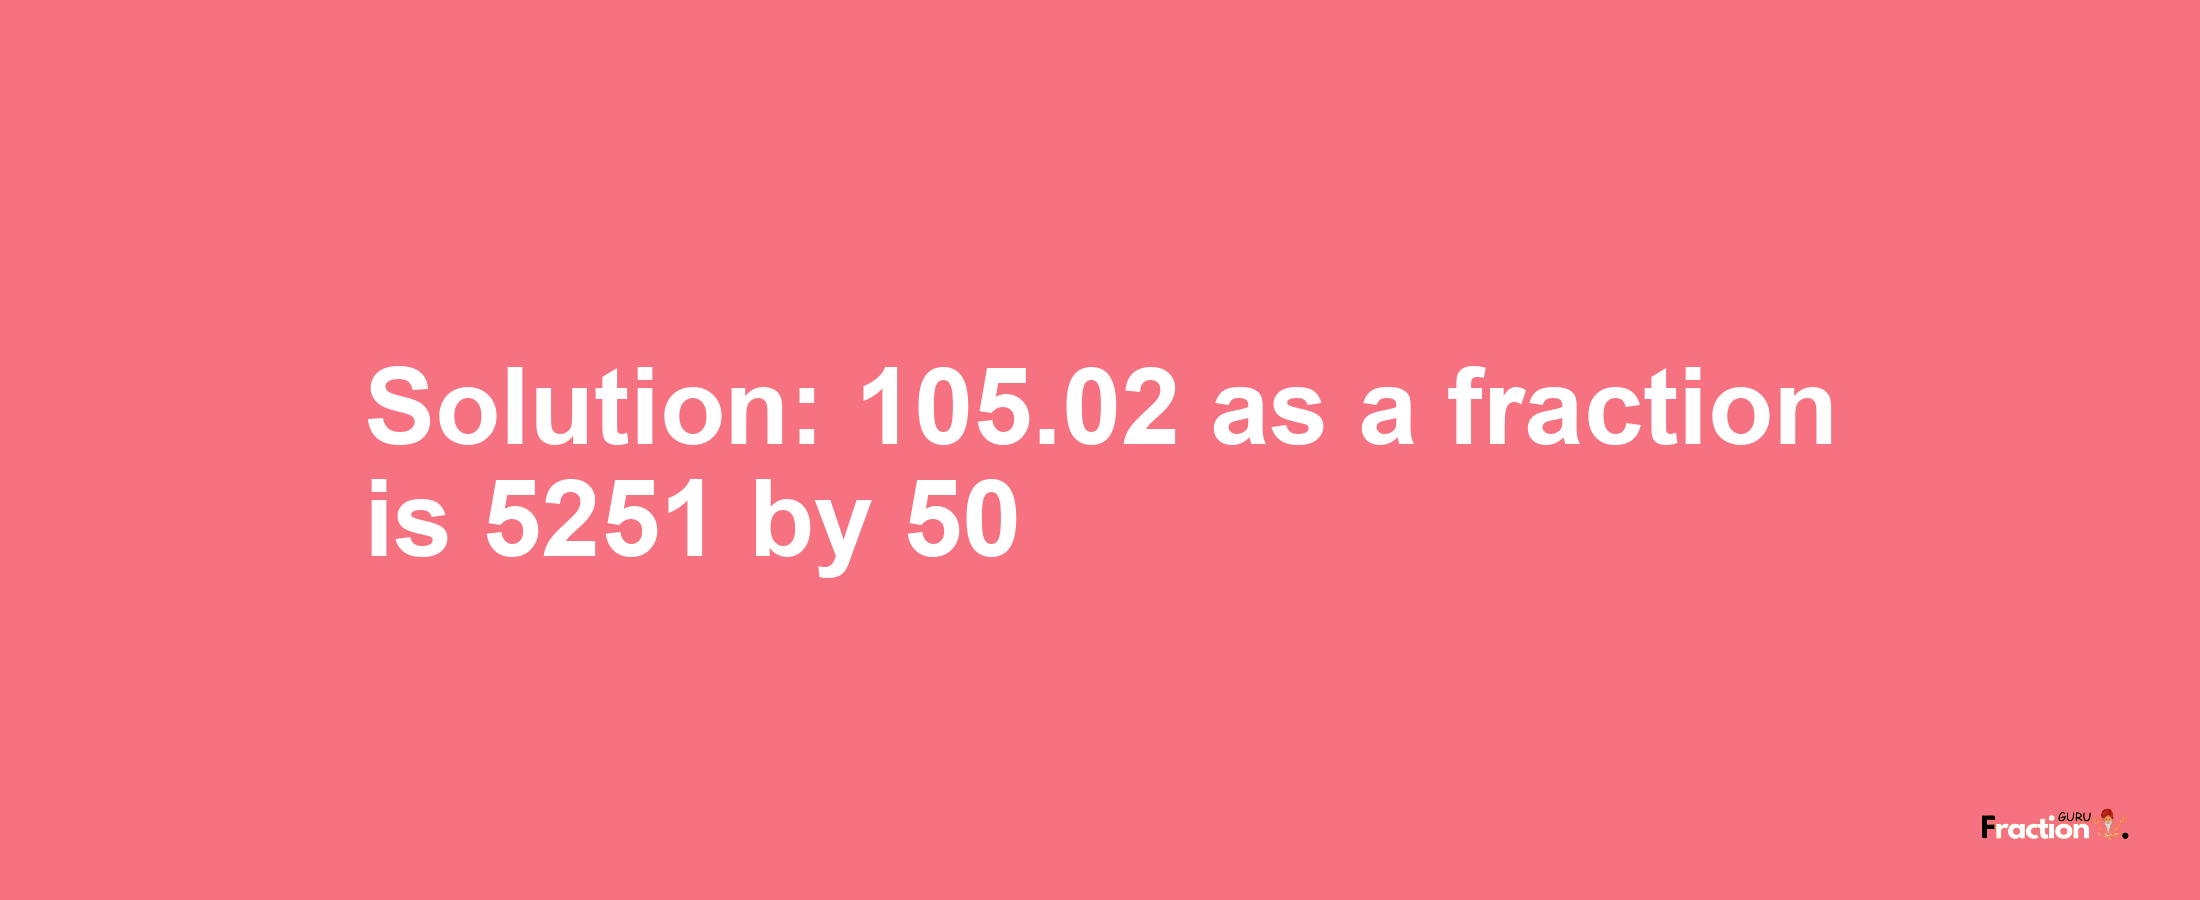 Solution:105.02 as a fraction is 5251/50